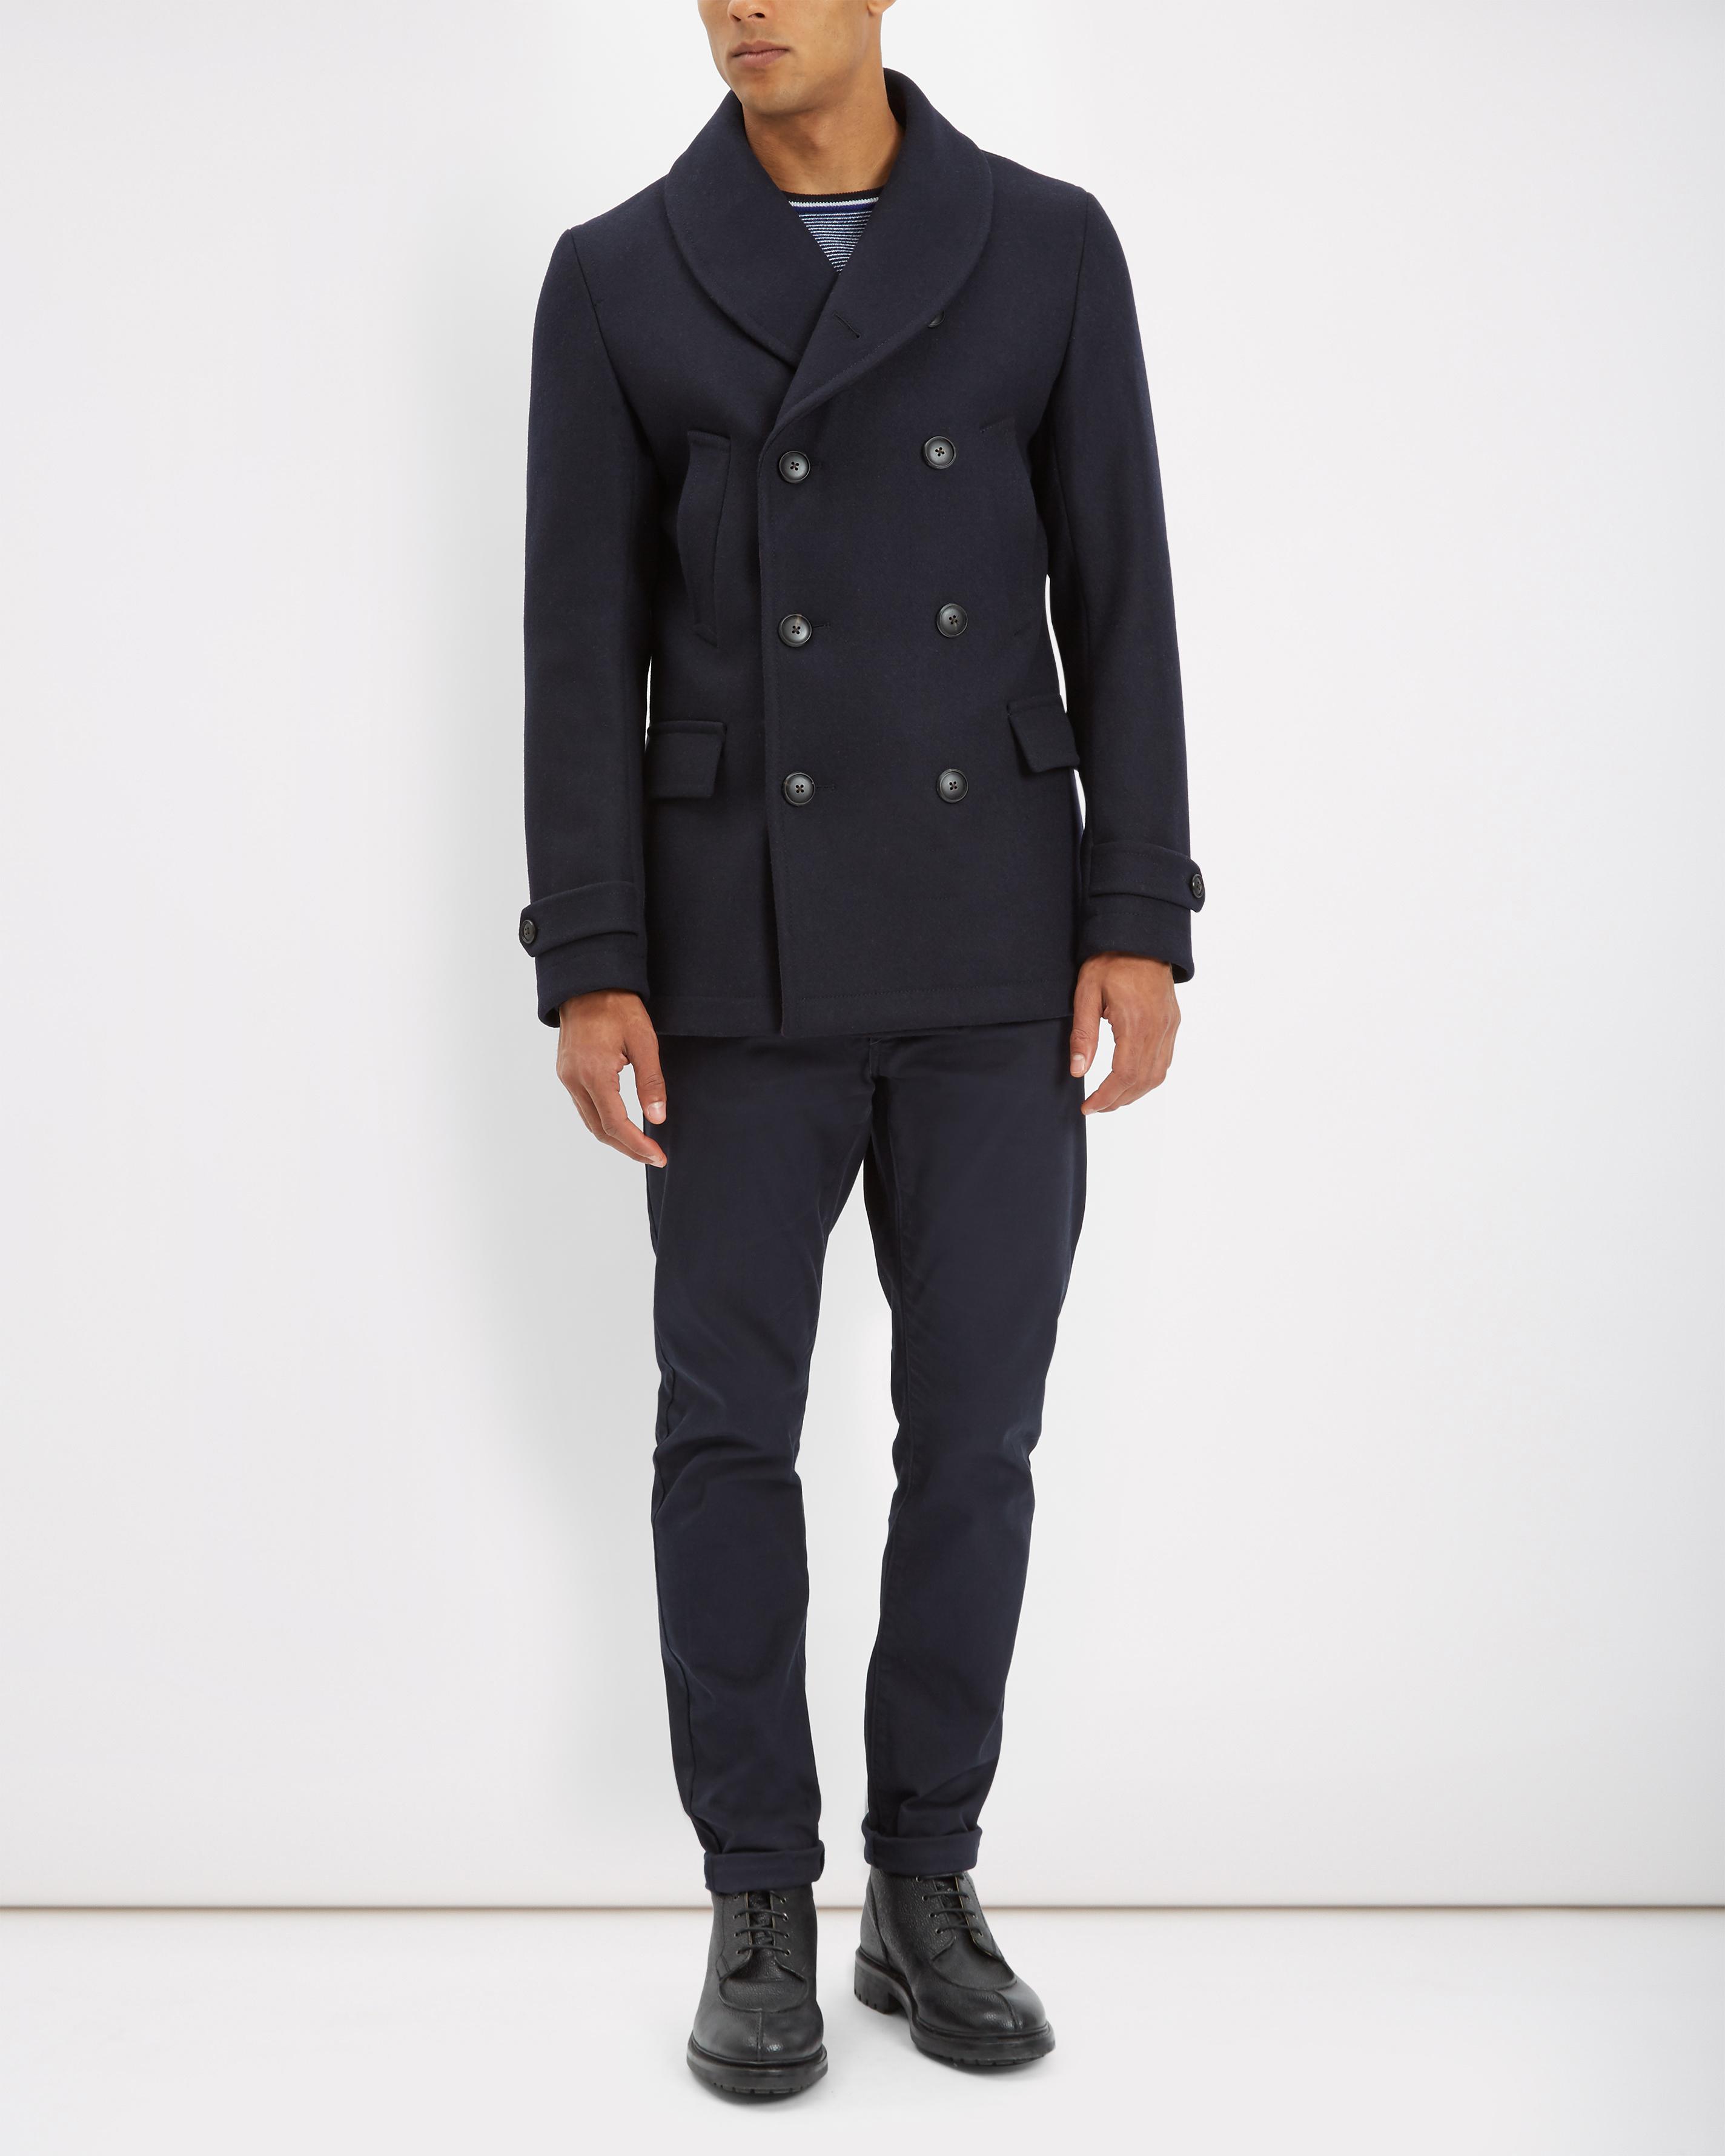 Lyst - Jaeger Wool Shawl Collar Peacoat in Blue for Men